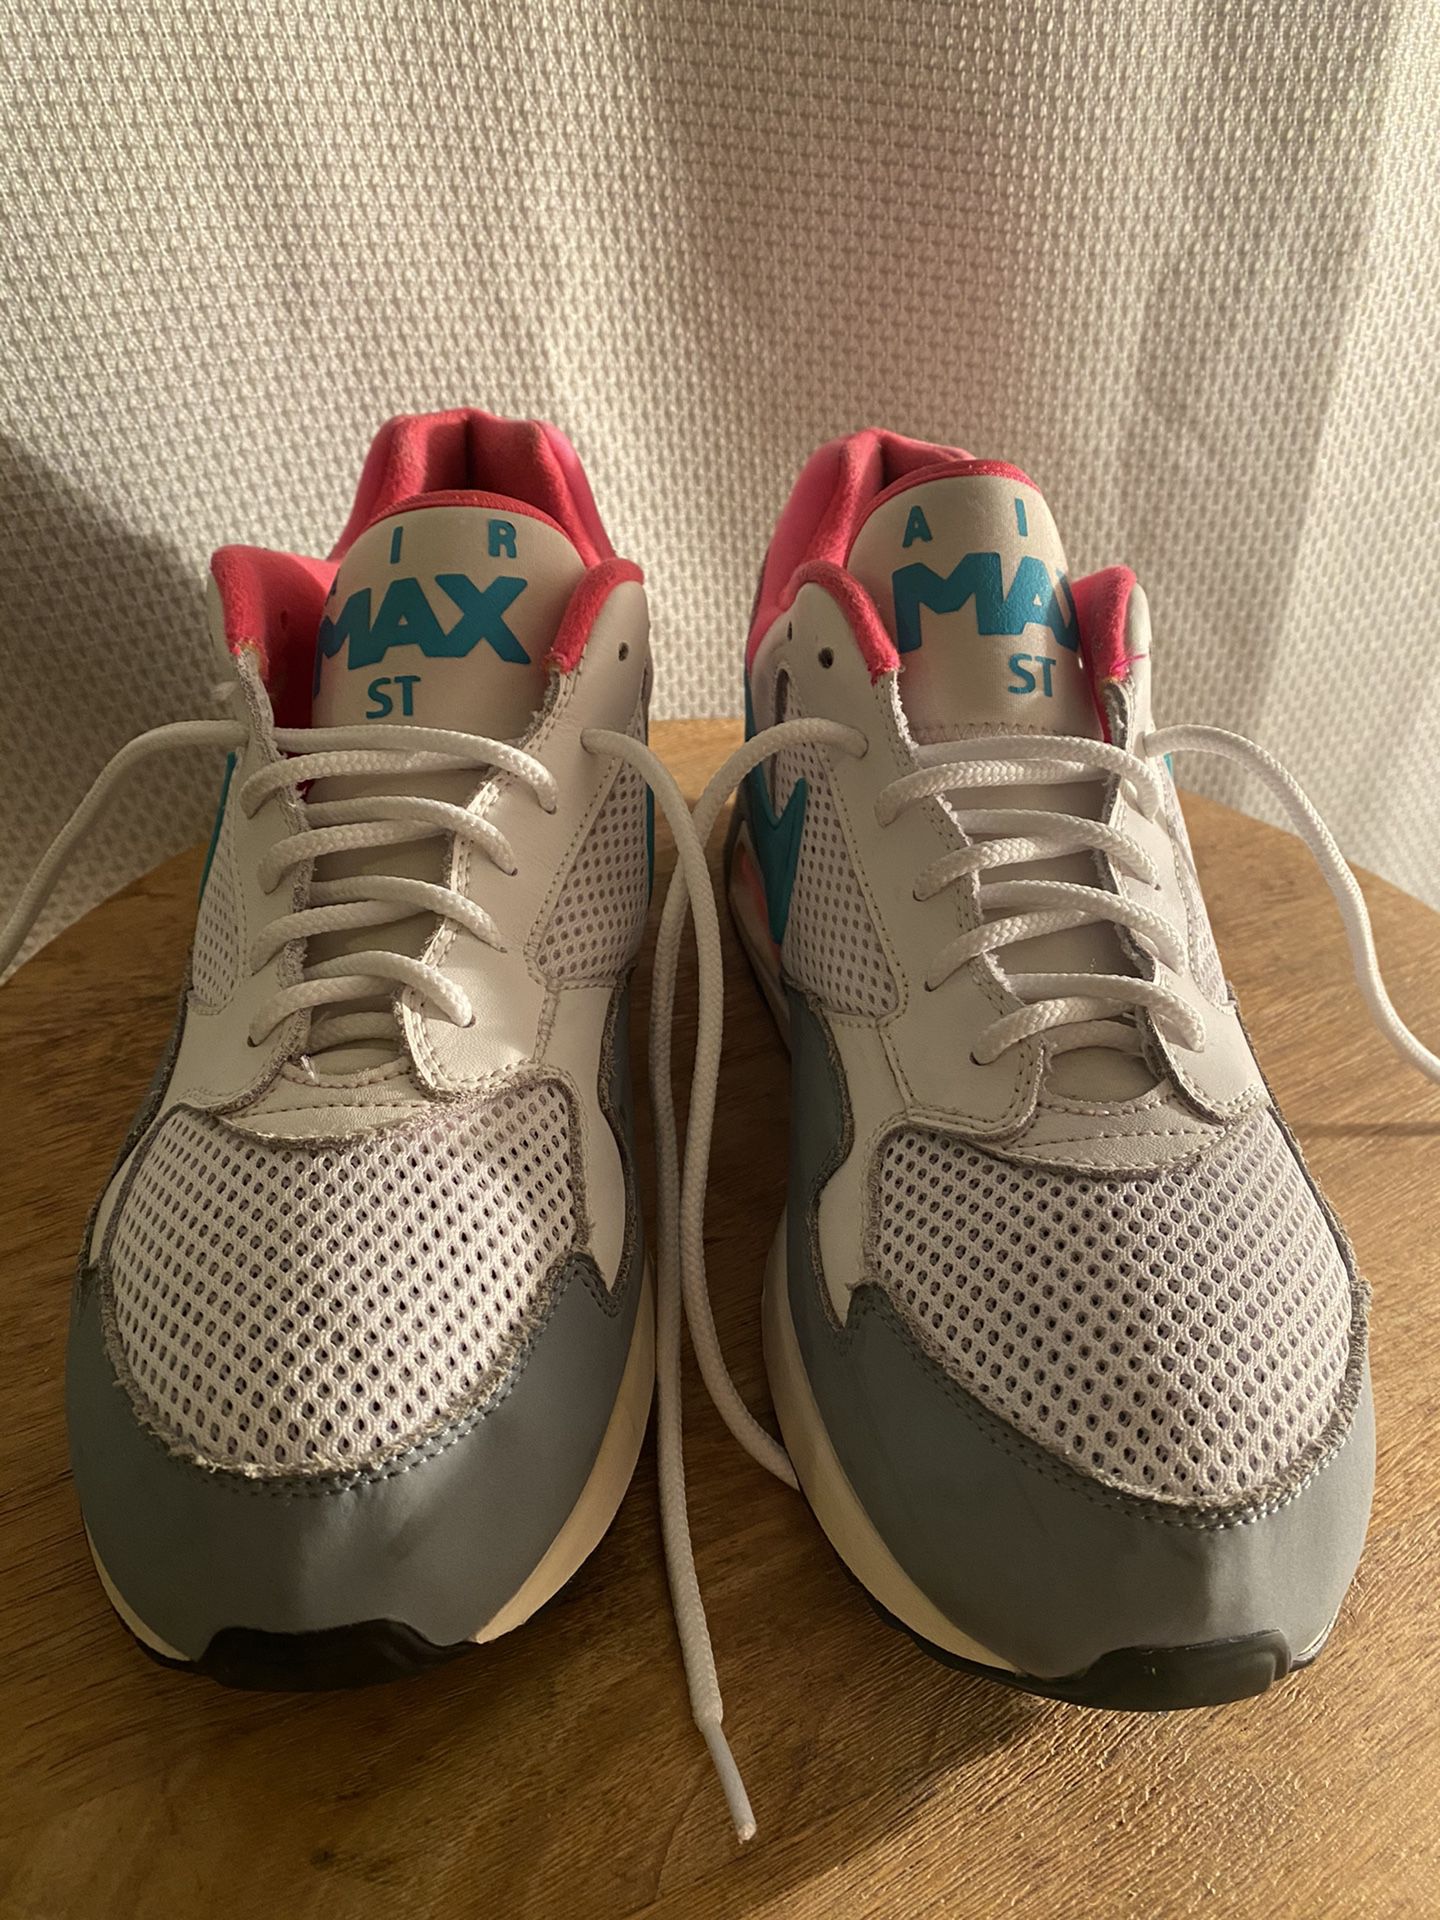 Air Max ST Dusty cactus size 11